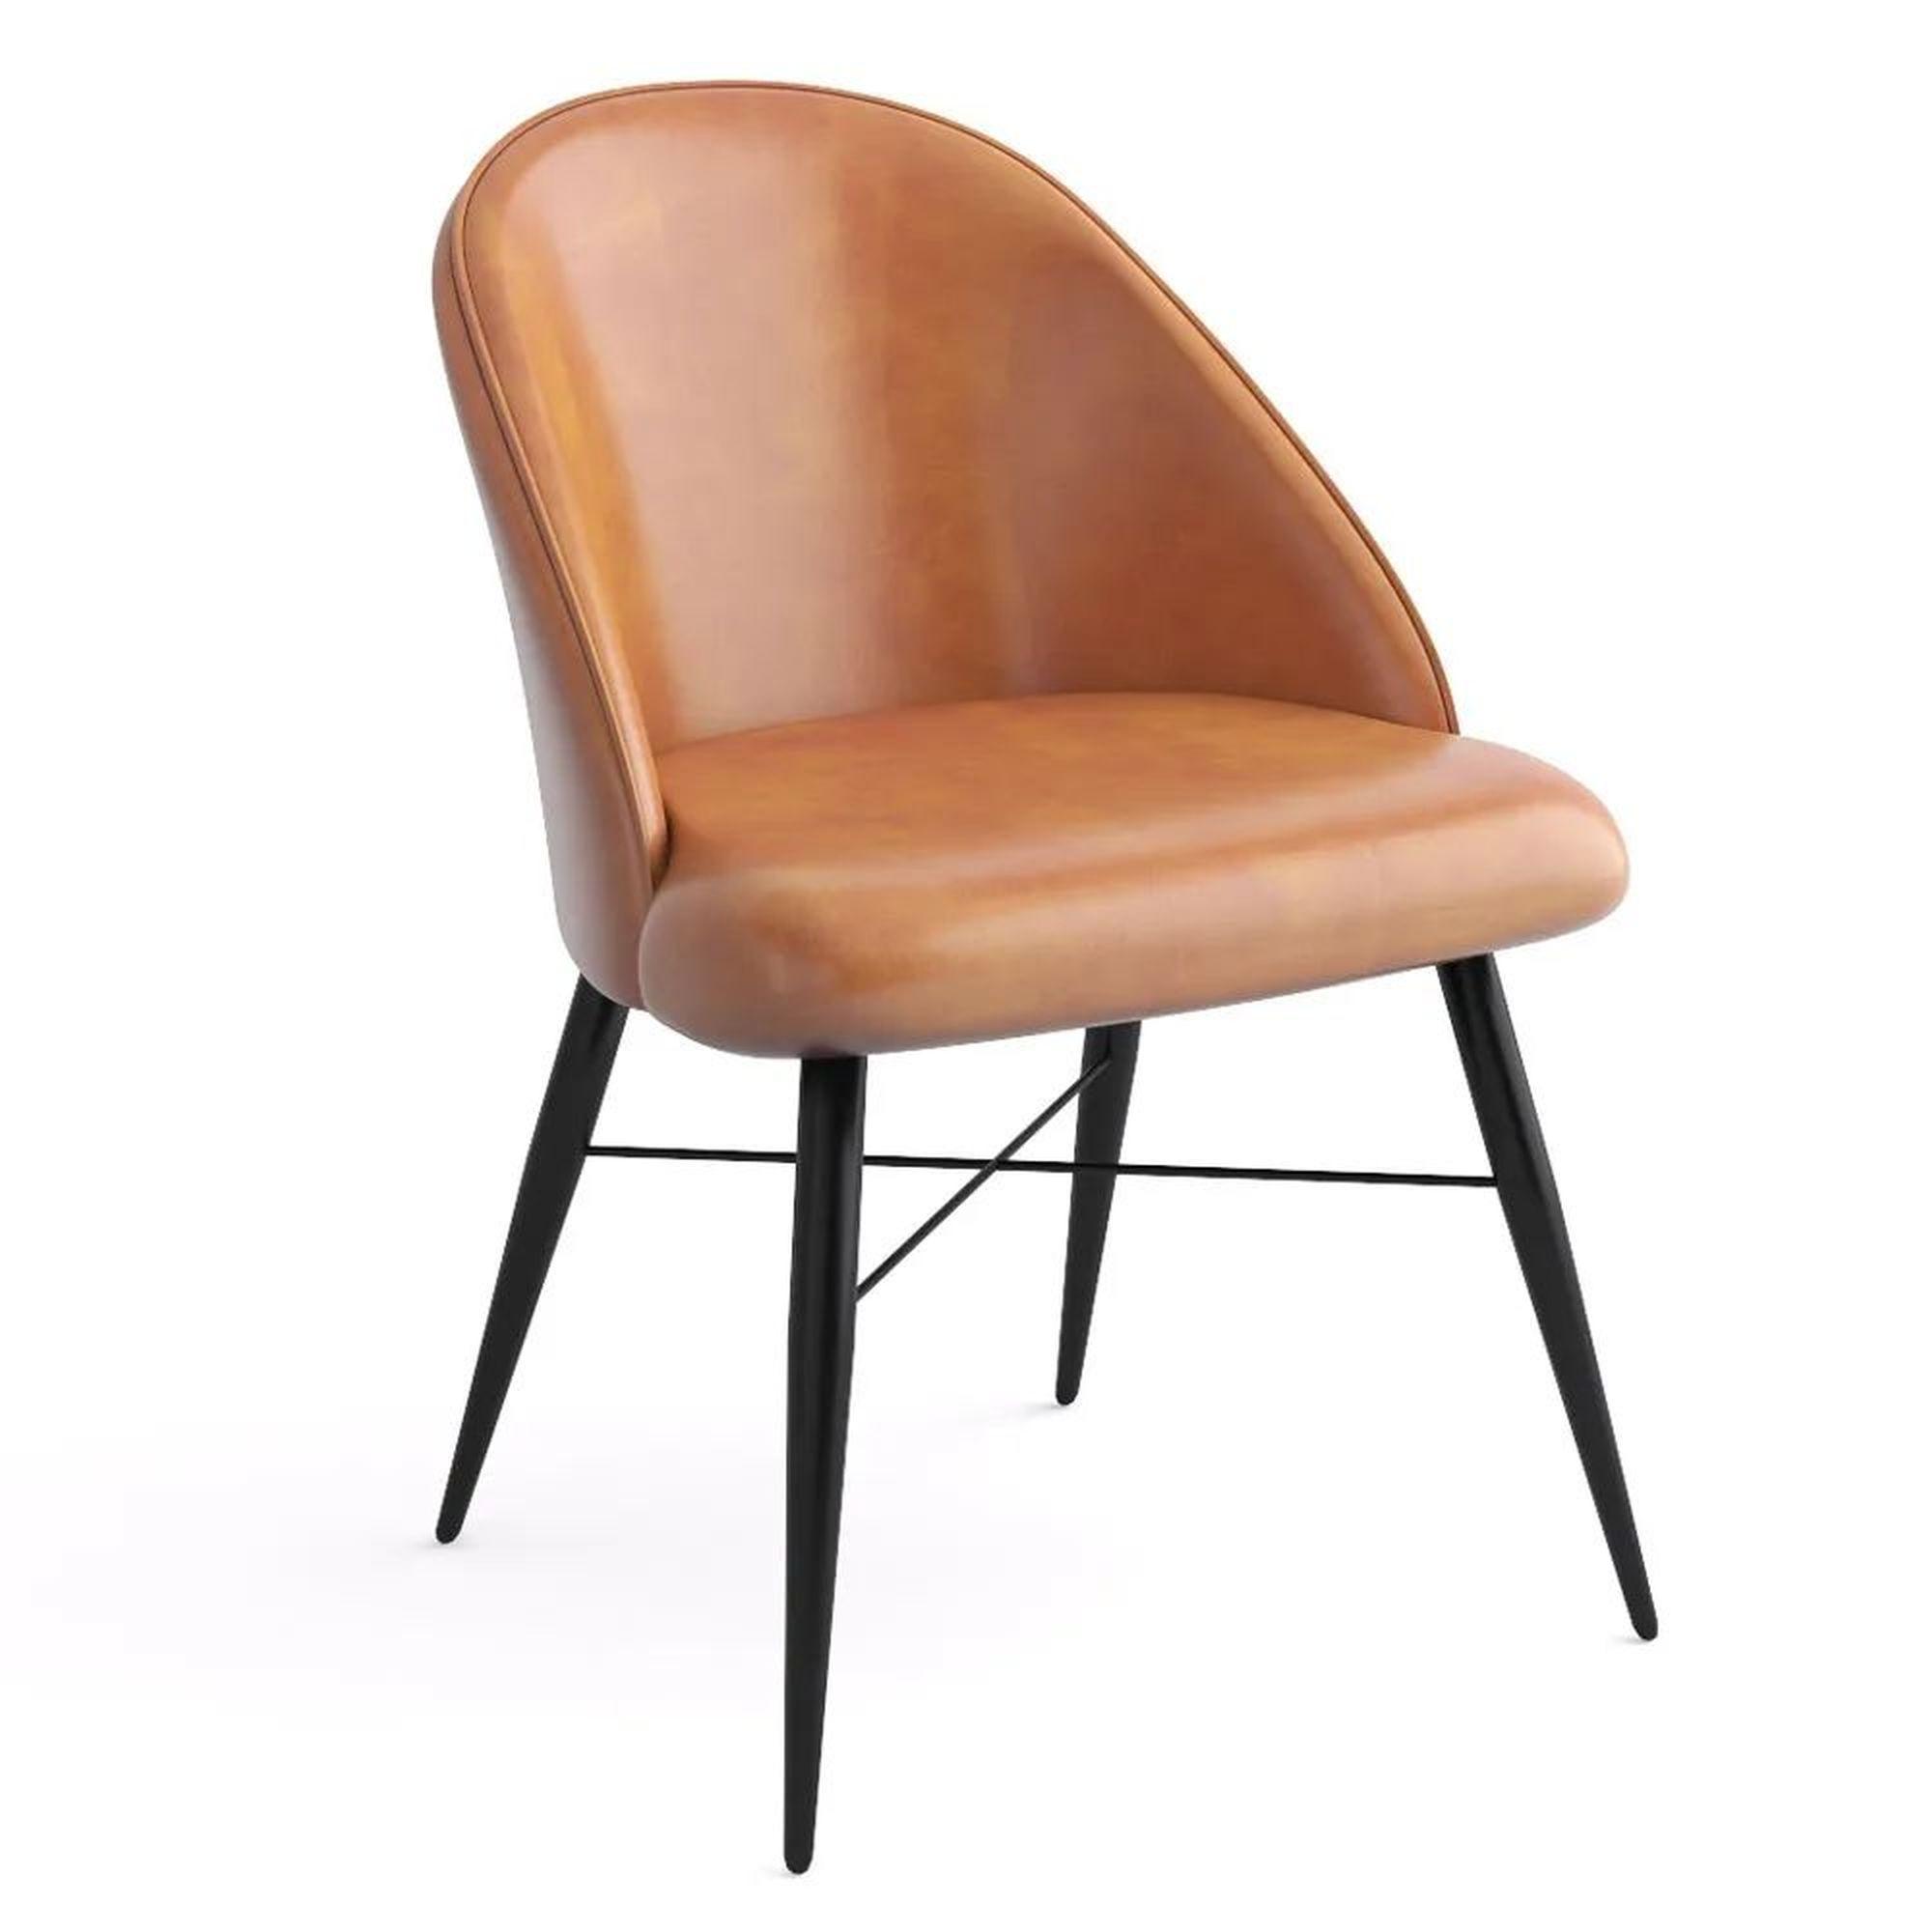 Bobby Tan Real Leather Dining Chair with Black Legs (Sold in Pairs)